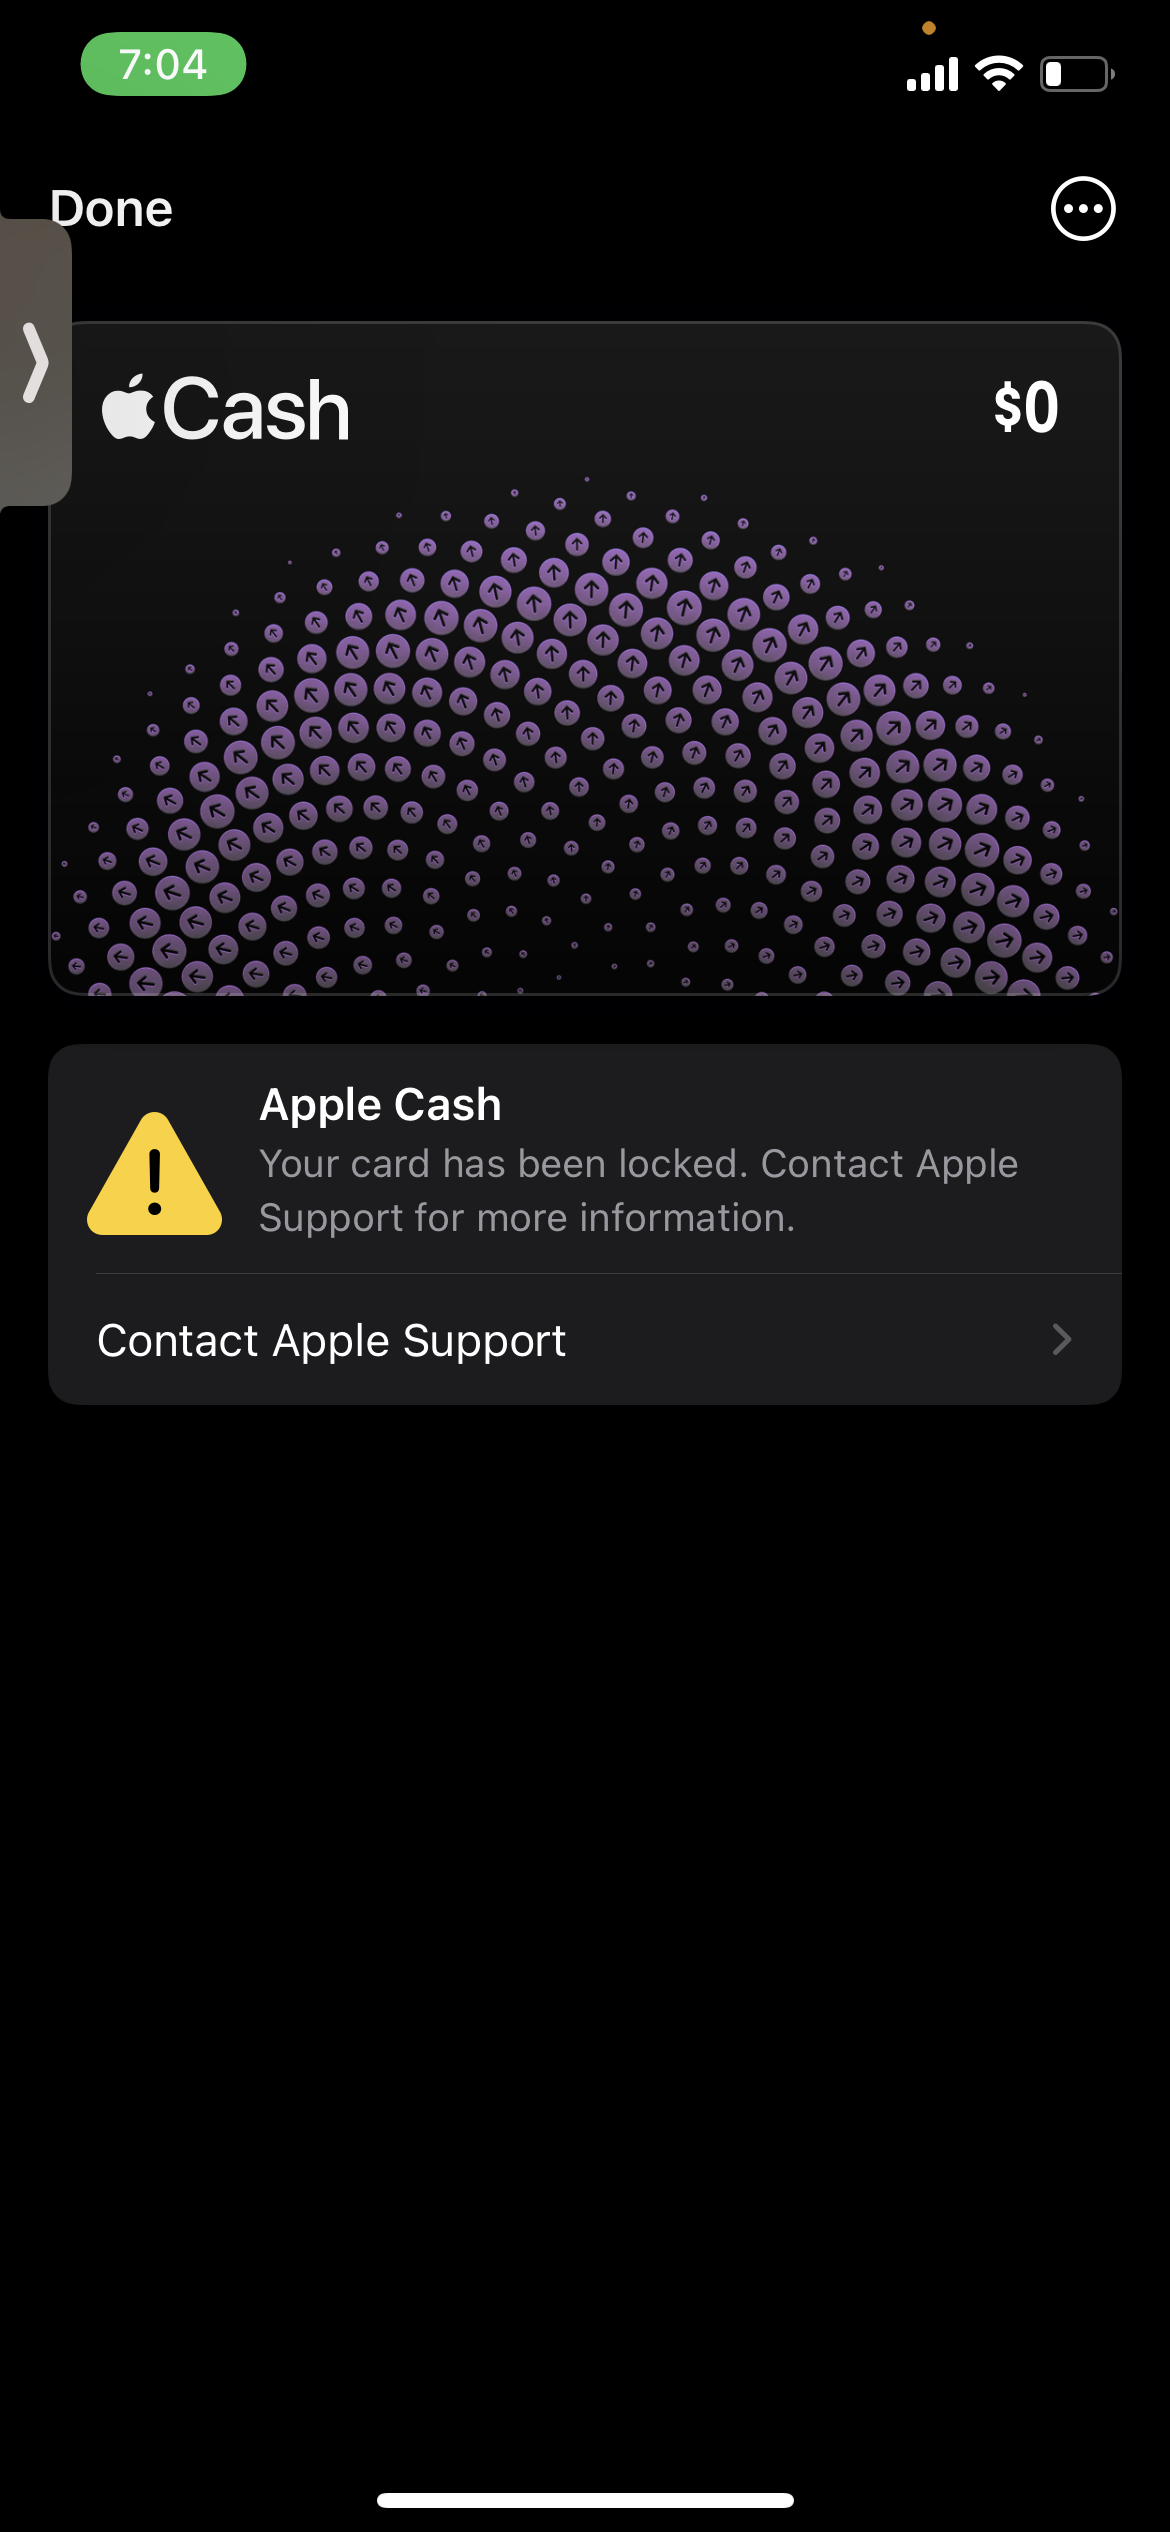 How to Contact Apple Support